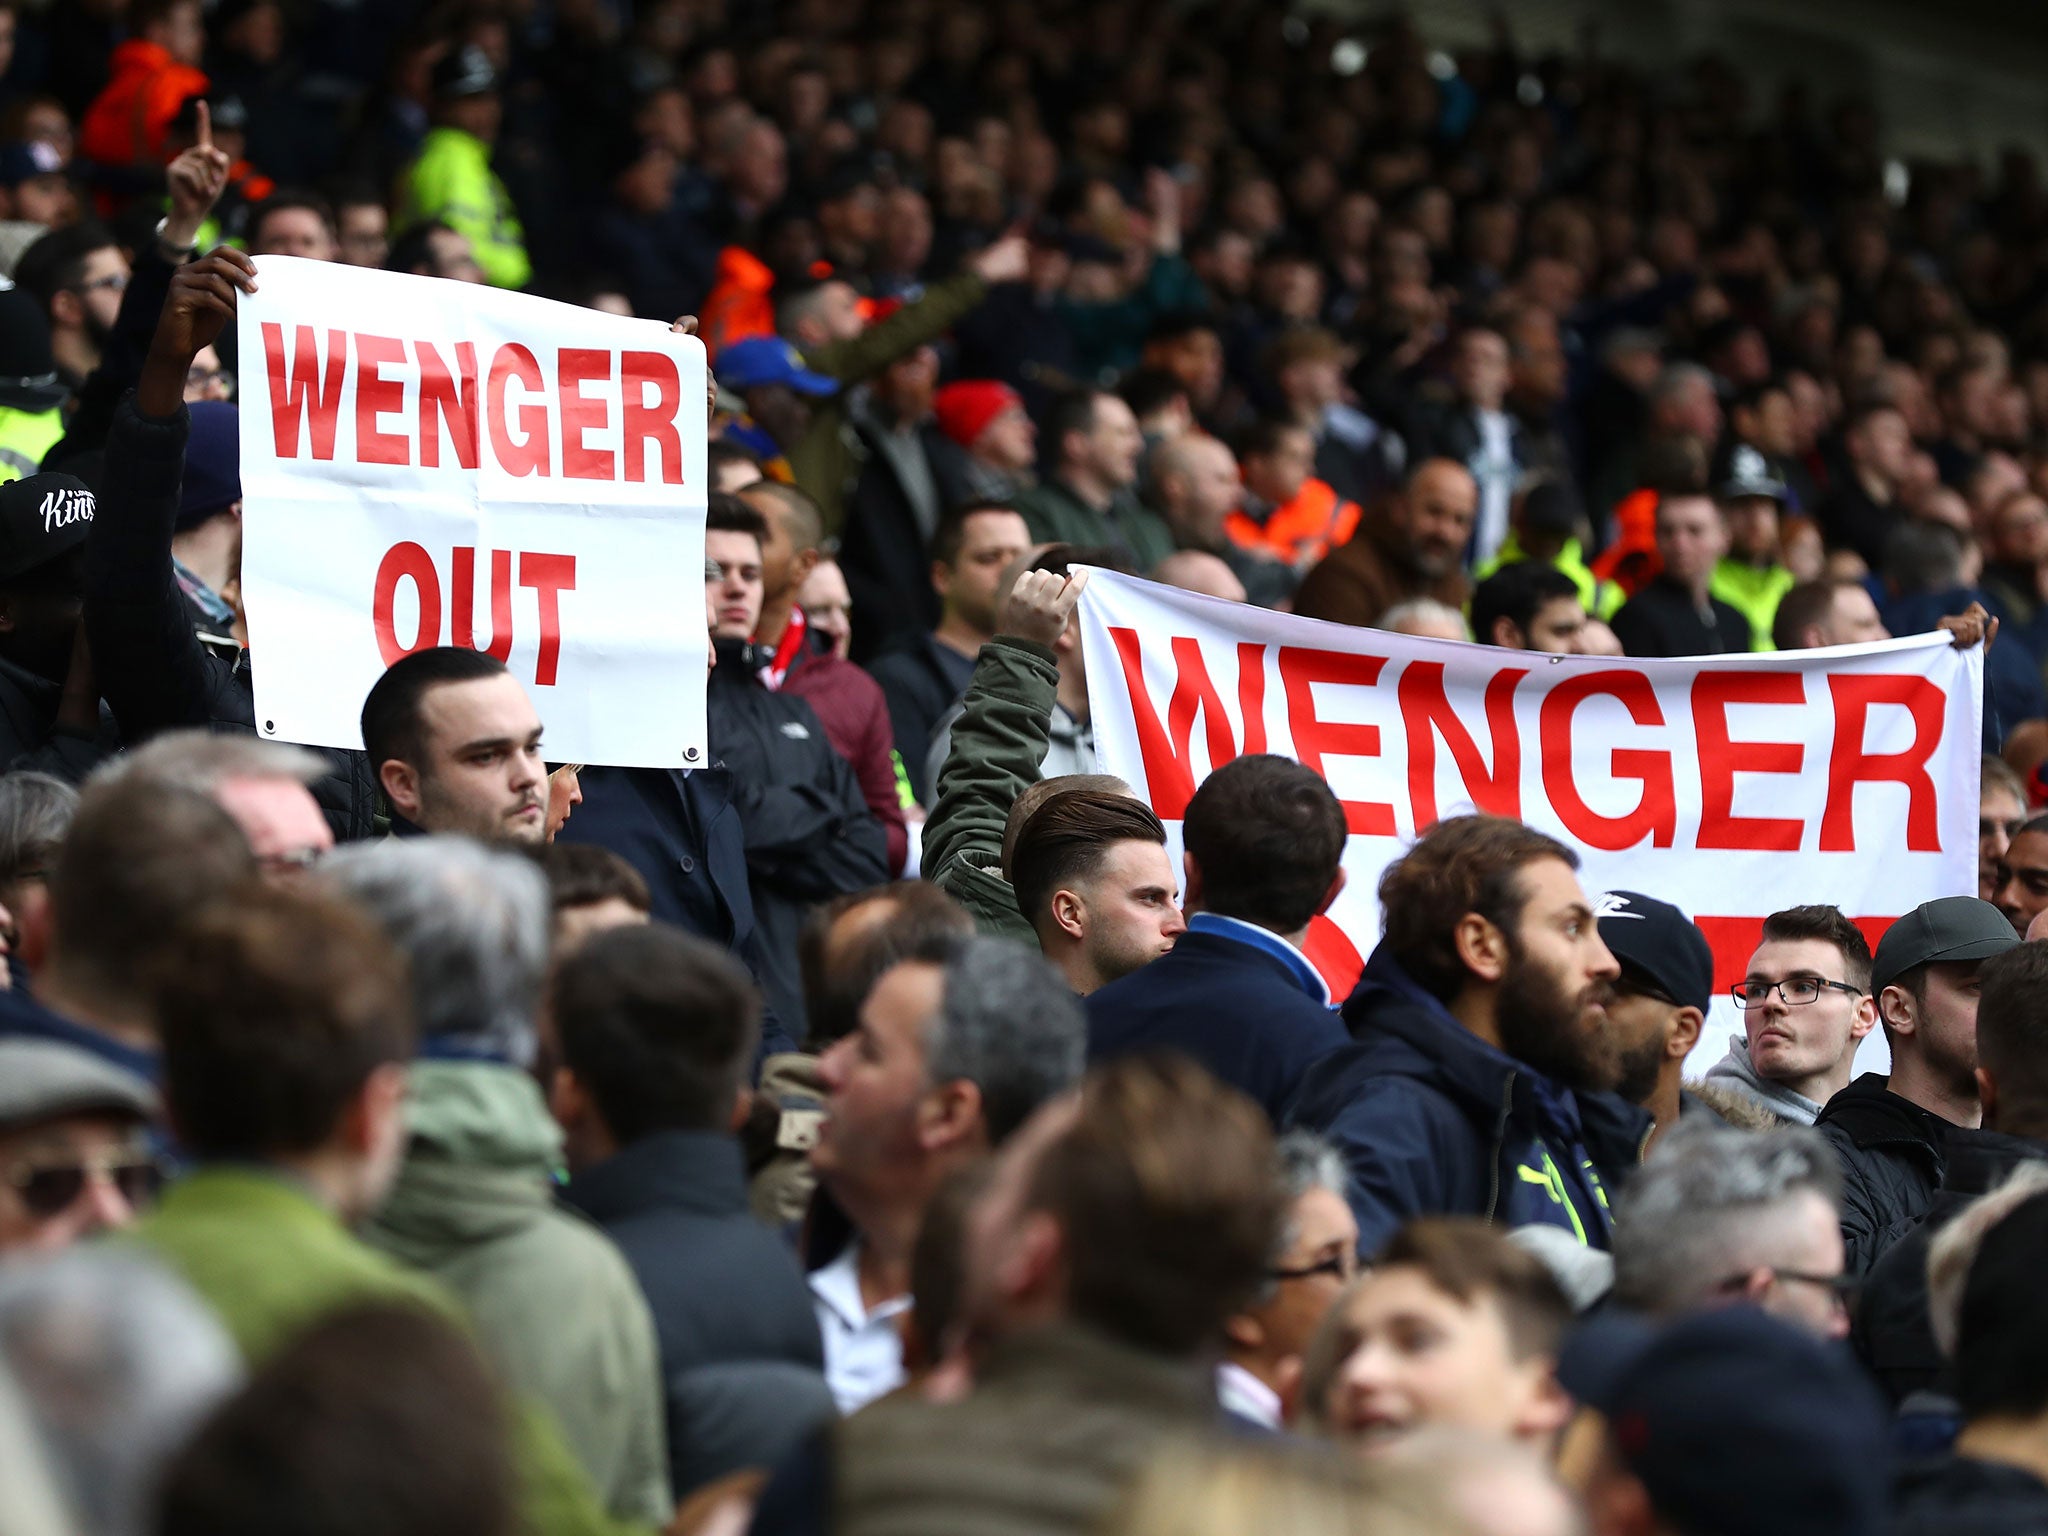 &#13;
Wenger is facing increased calls to leave the club &#13;